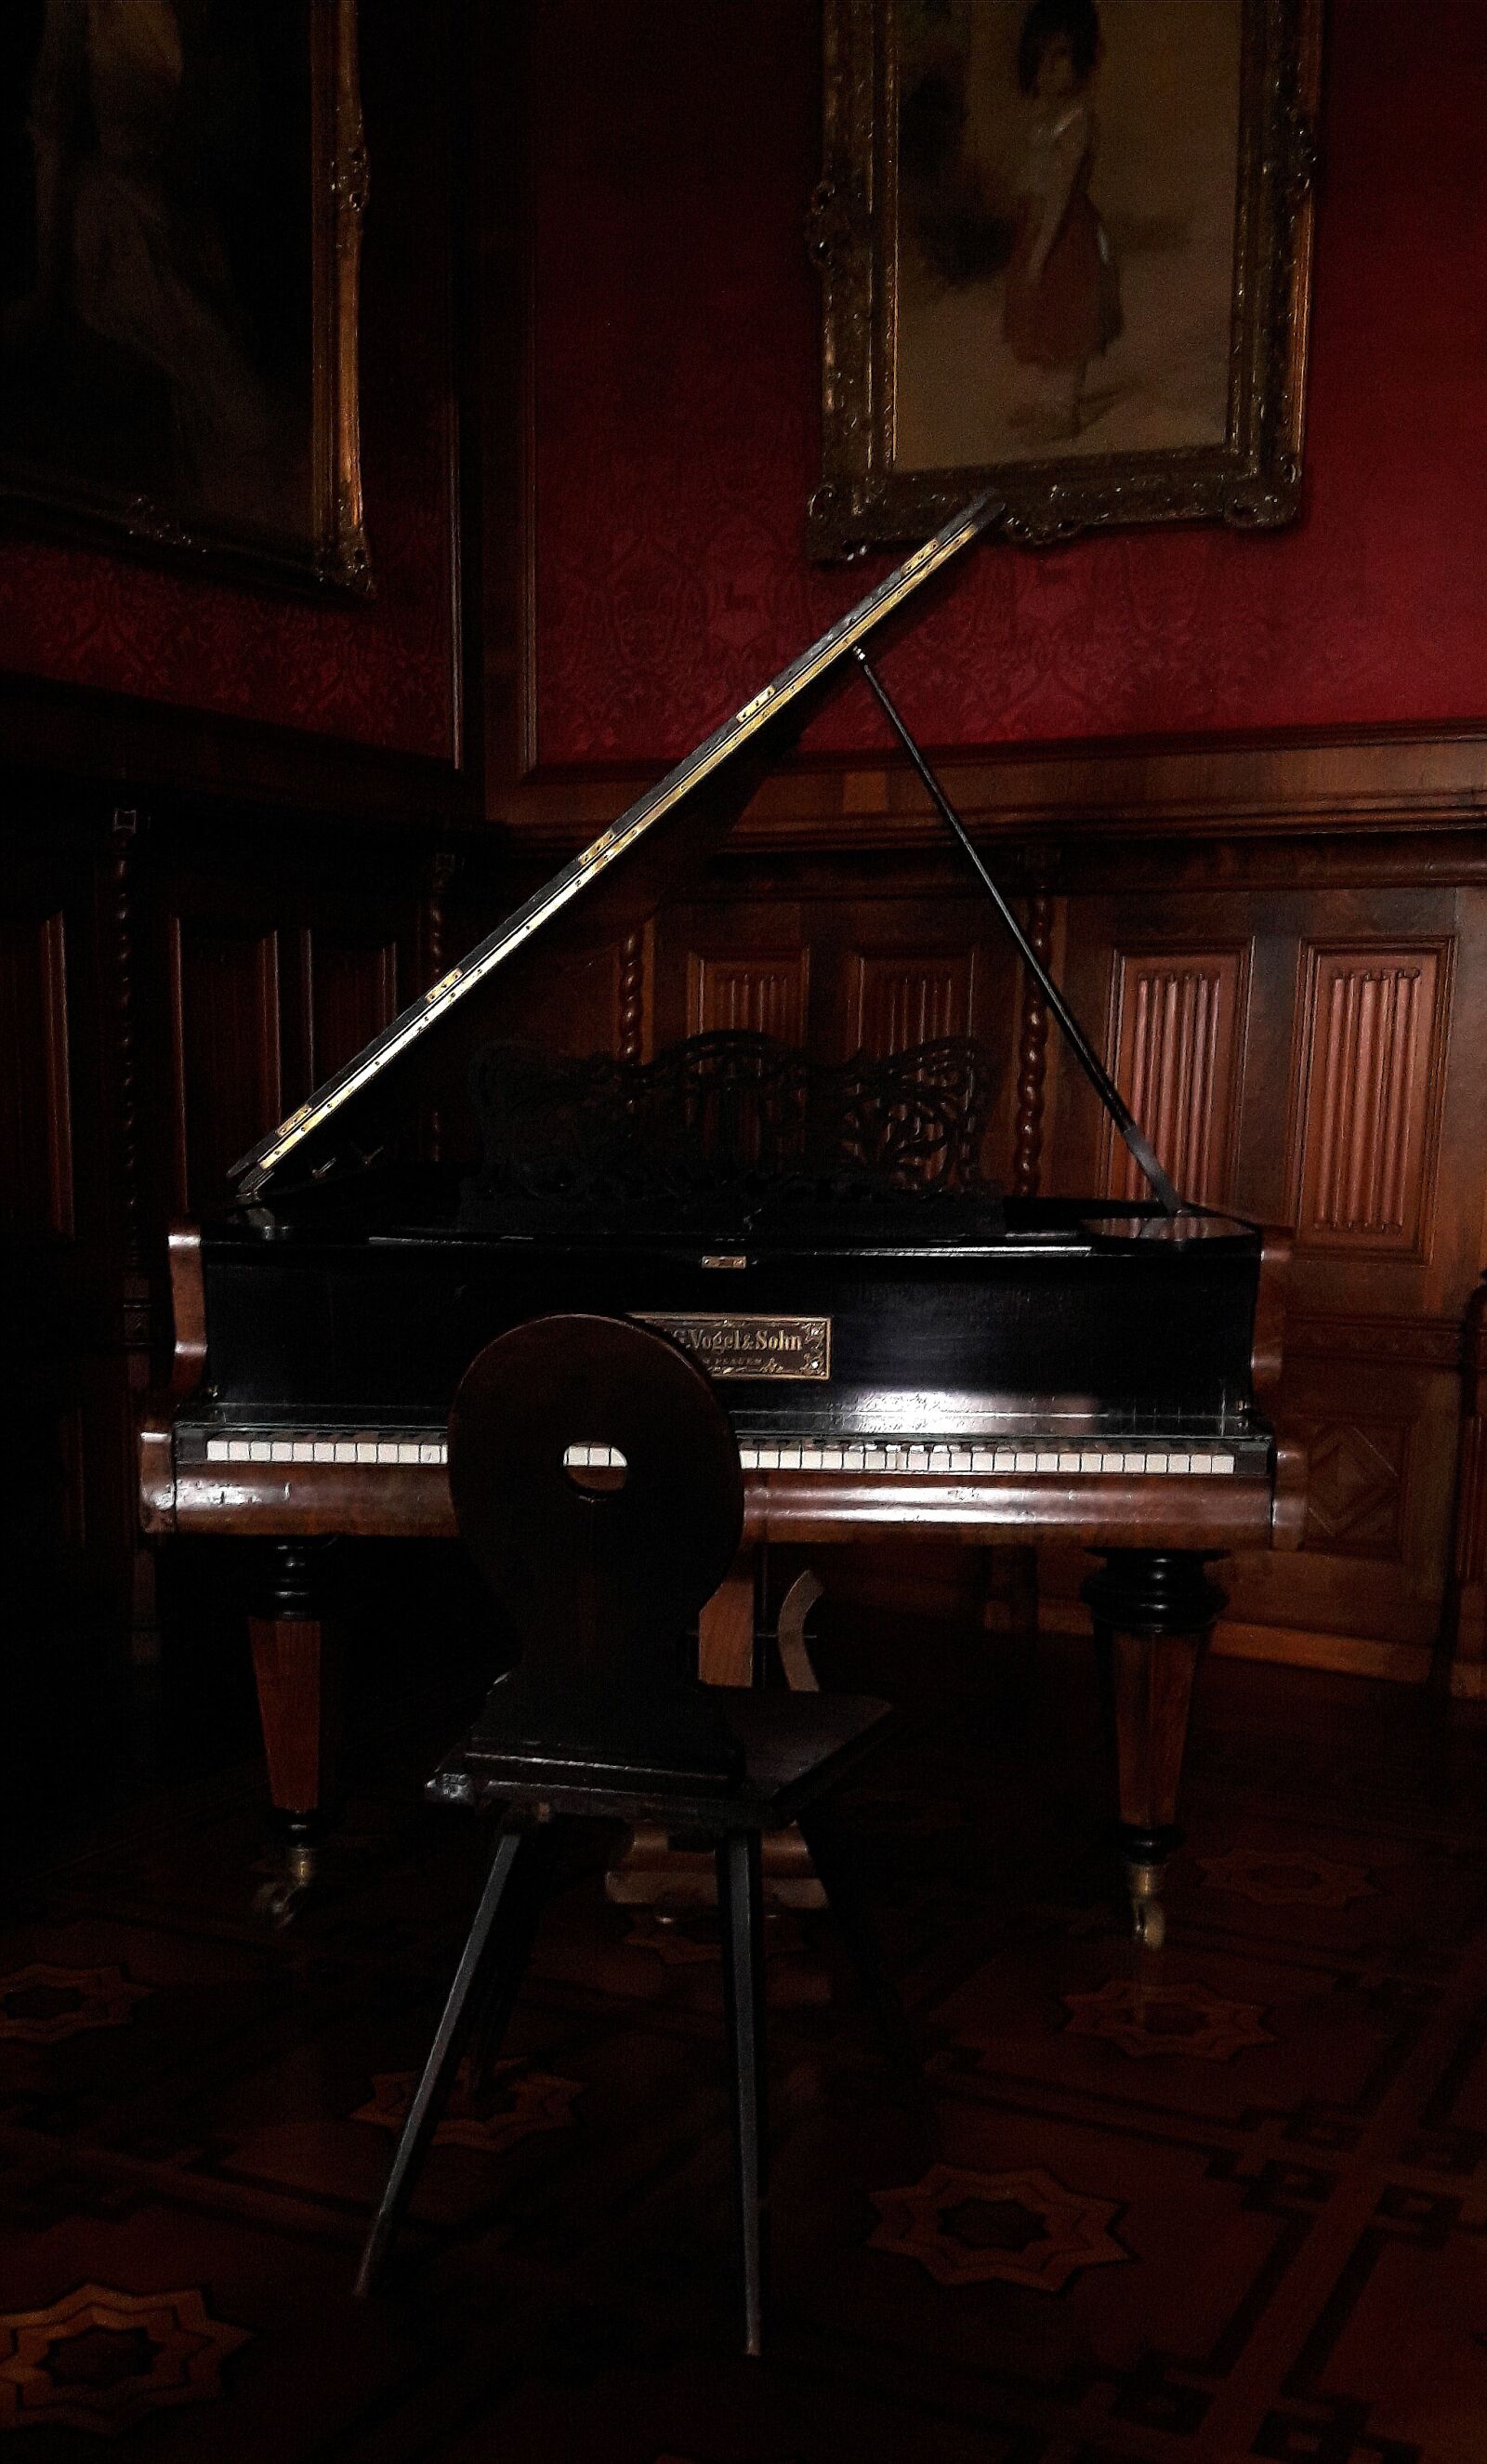 Samsung Galaxy A3(2016) sample photo. Piano, old, museum photography